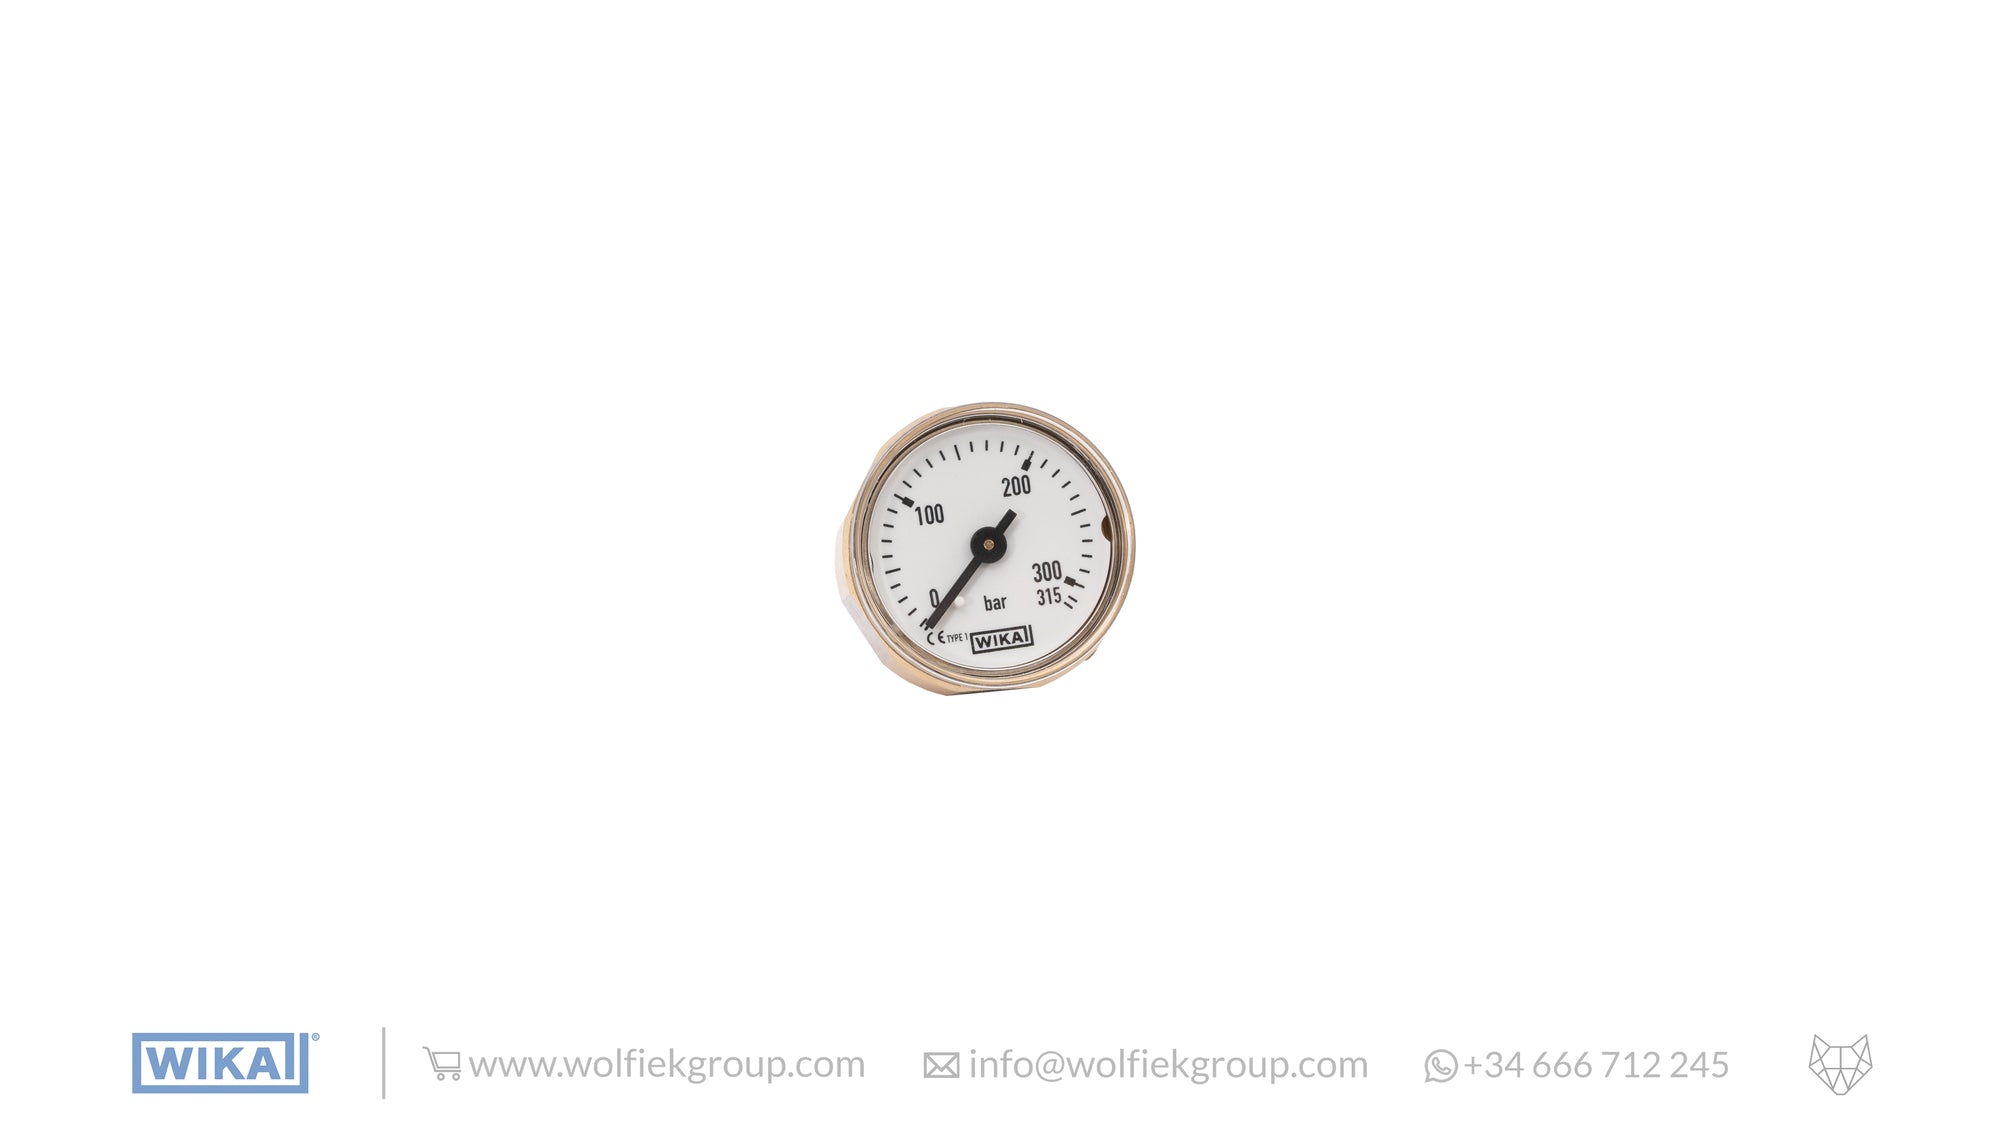 Wika analogue gauge that measures pressure in white